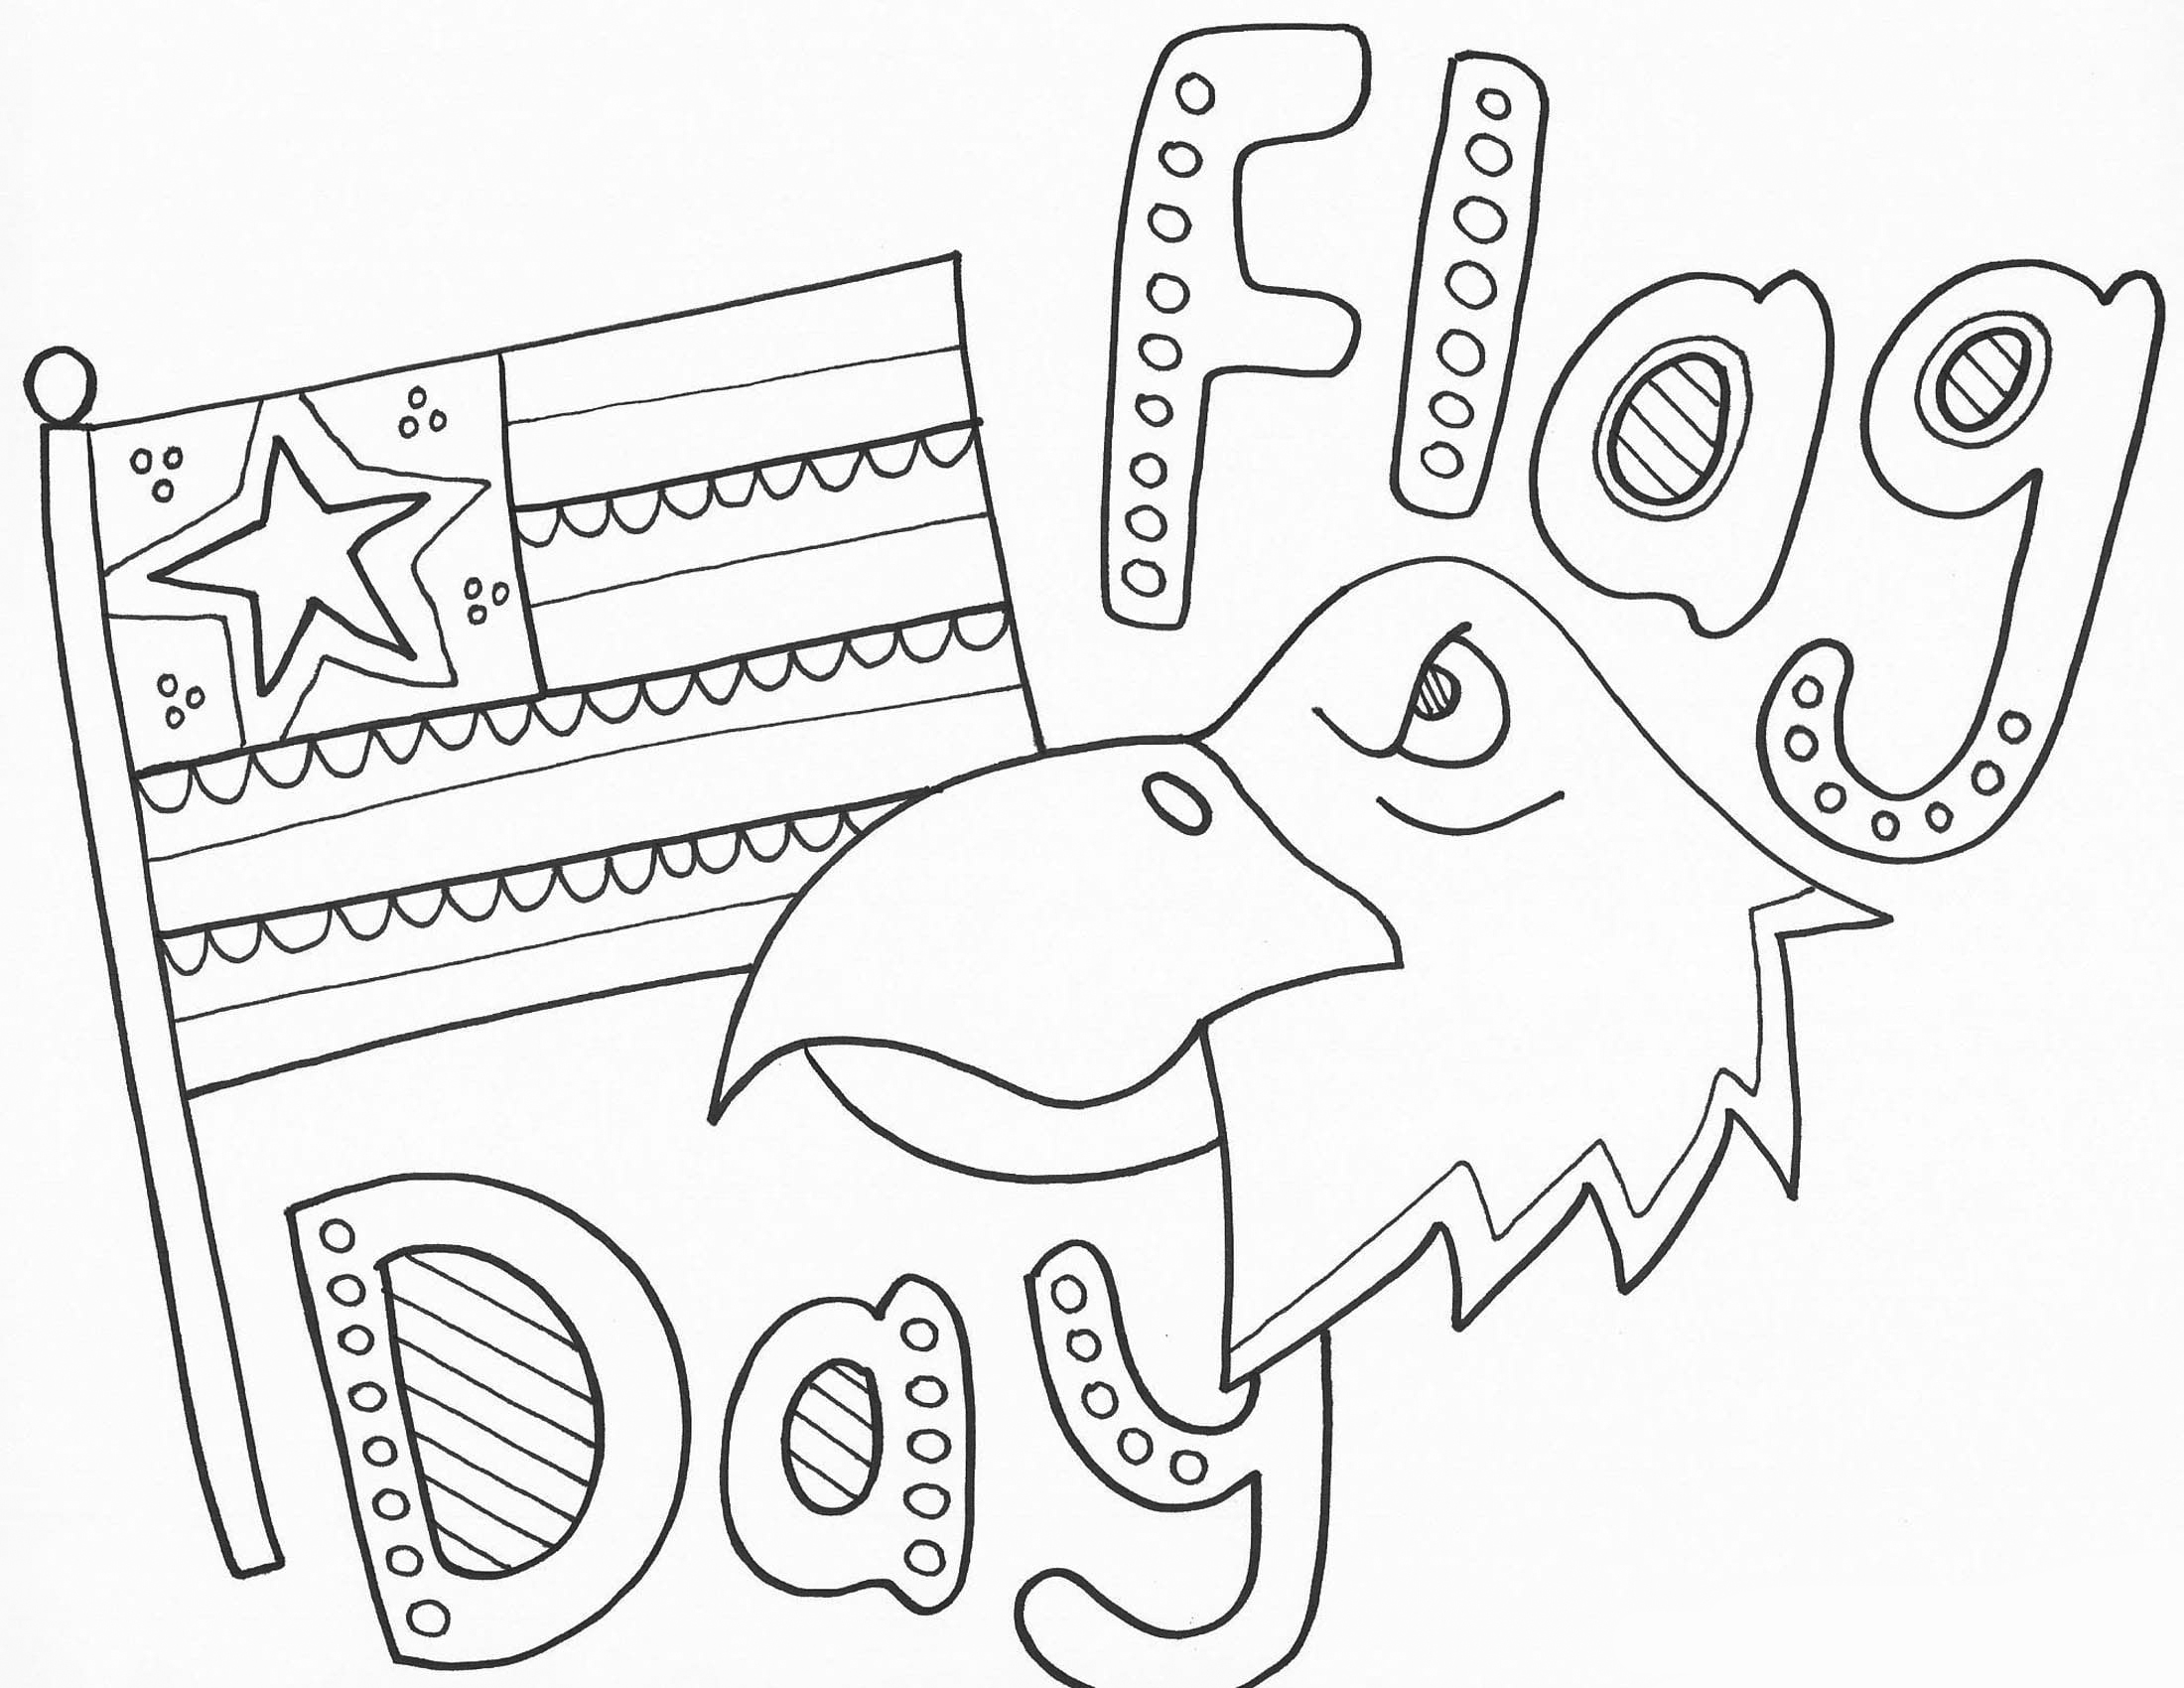 Flag Day Coloring Pages Best Coloring Pages For Kids